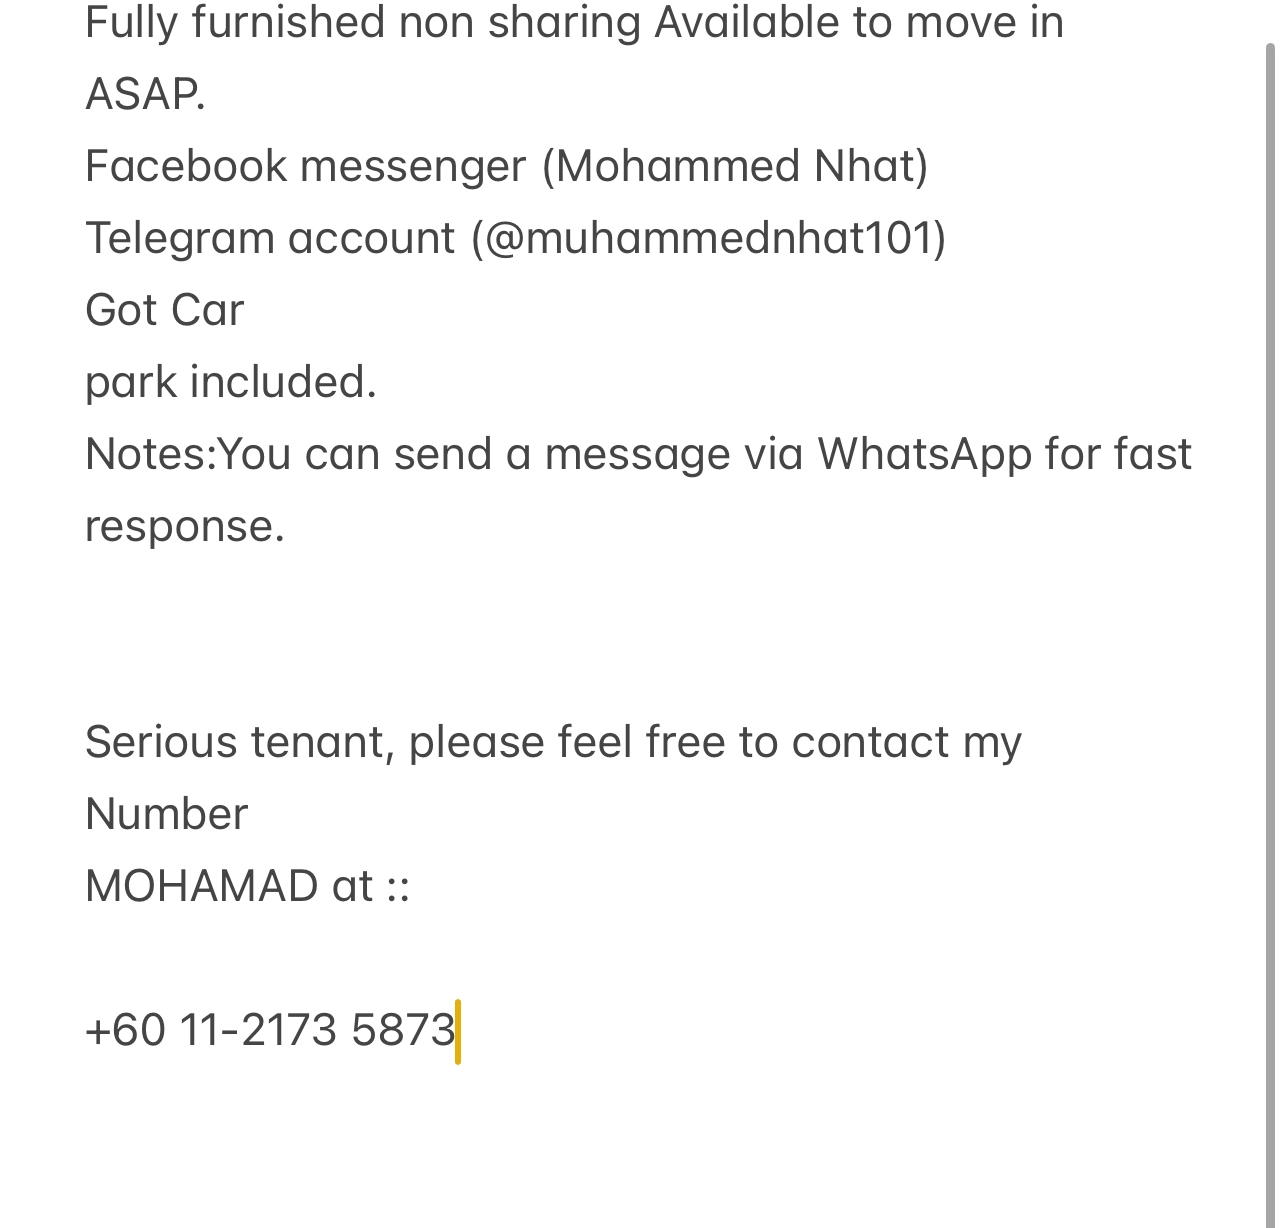 room for rent, single room, kidurong height, Send the owner a message on WhatsApp/facebook if you want to RENT the unit facebook (Mohammed Nhat)&Telegram(@muhammednhat101) Fully furnished non sharing :(comfortable)